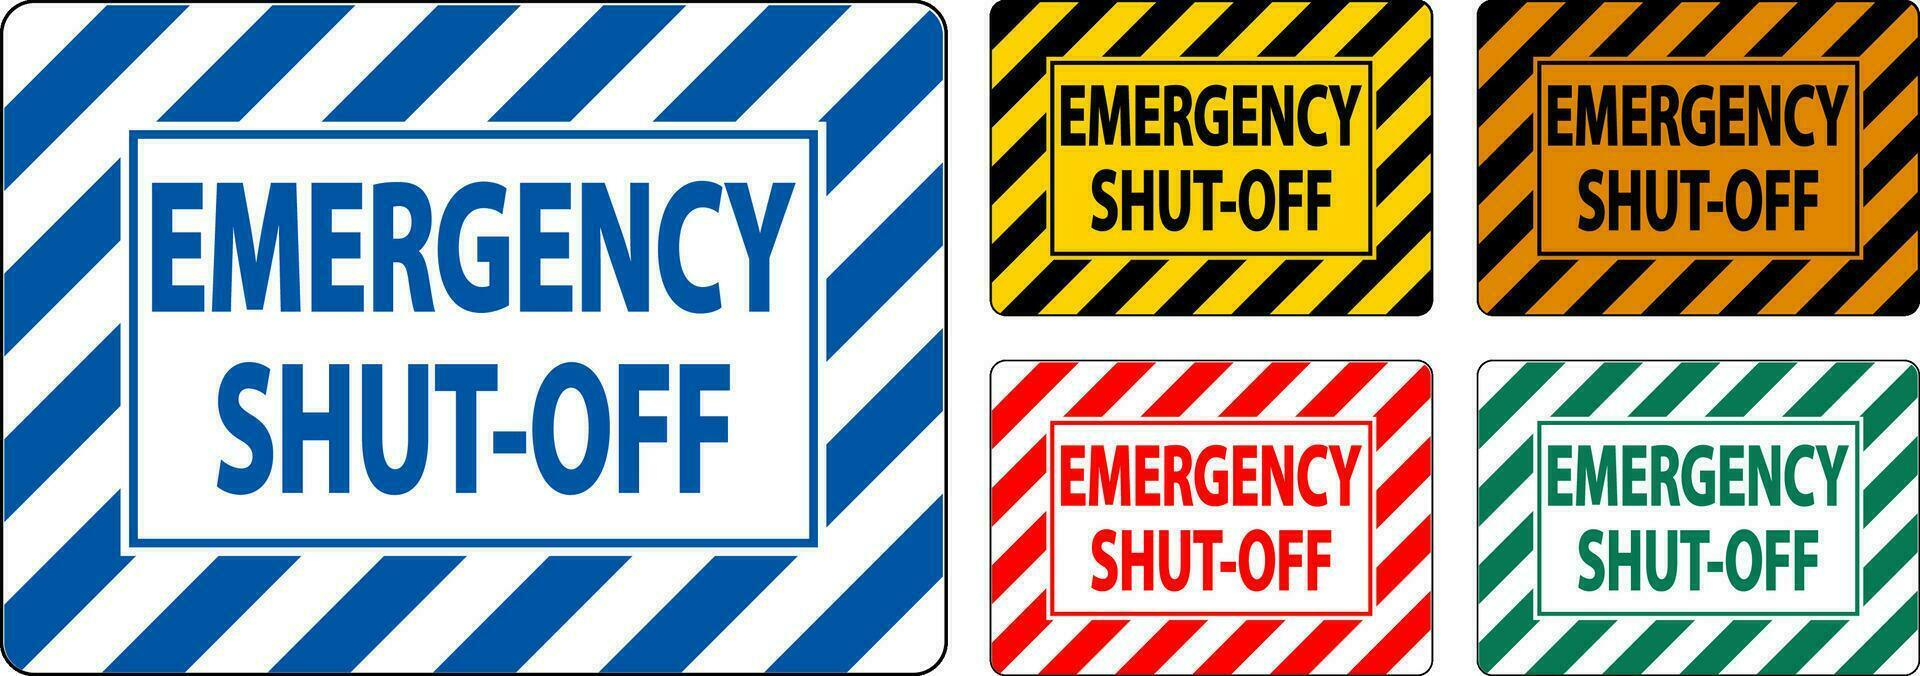 Electrical Equipment Warning Sign Emergency Shut-Off vector